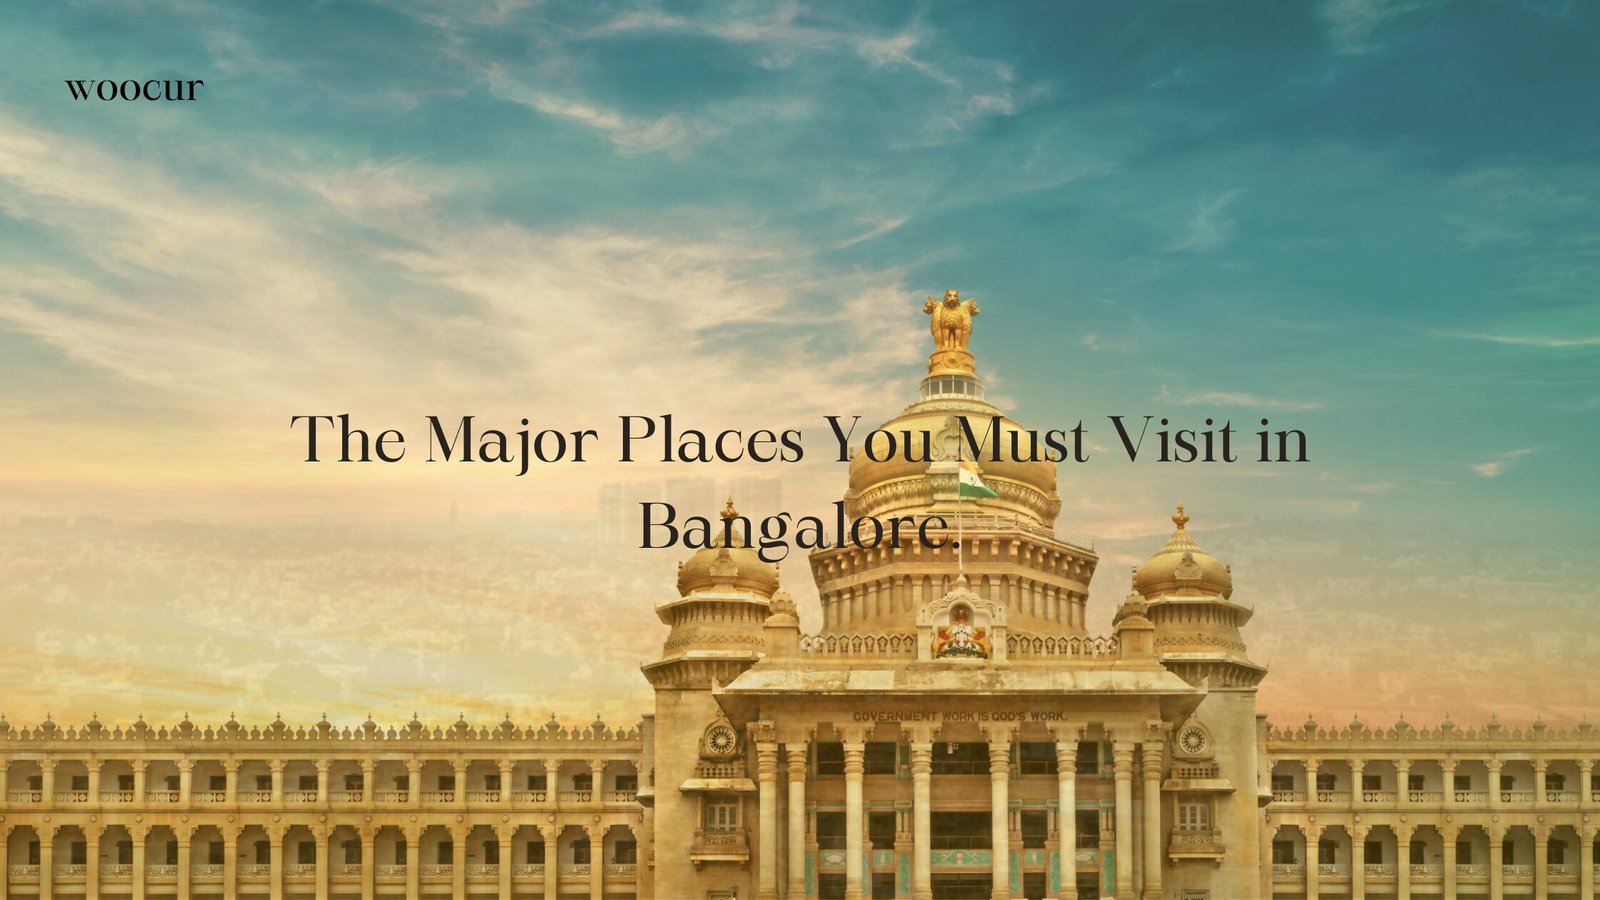 The Major Places You Must Visit in Bangalore.